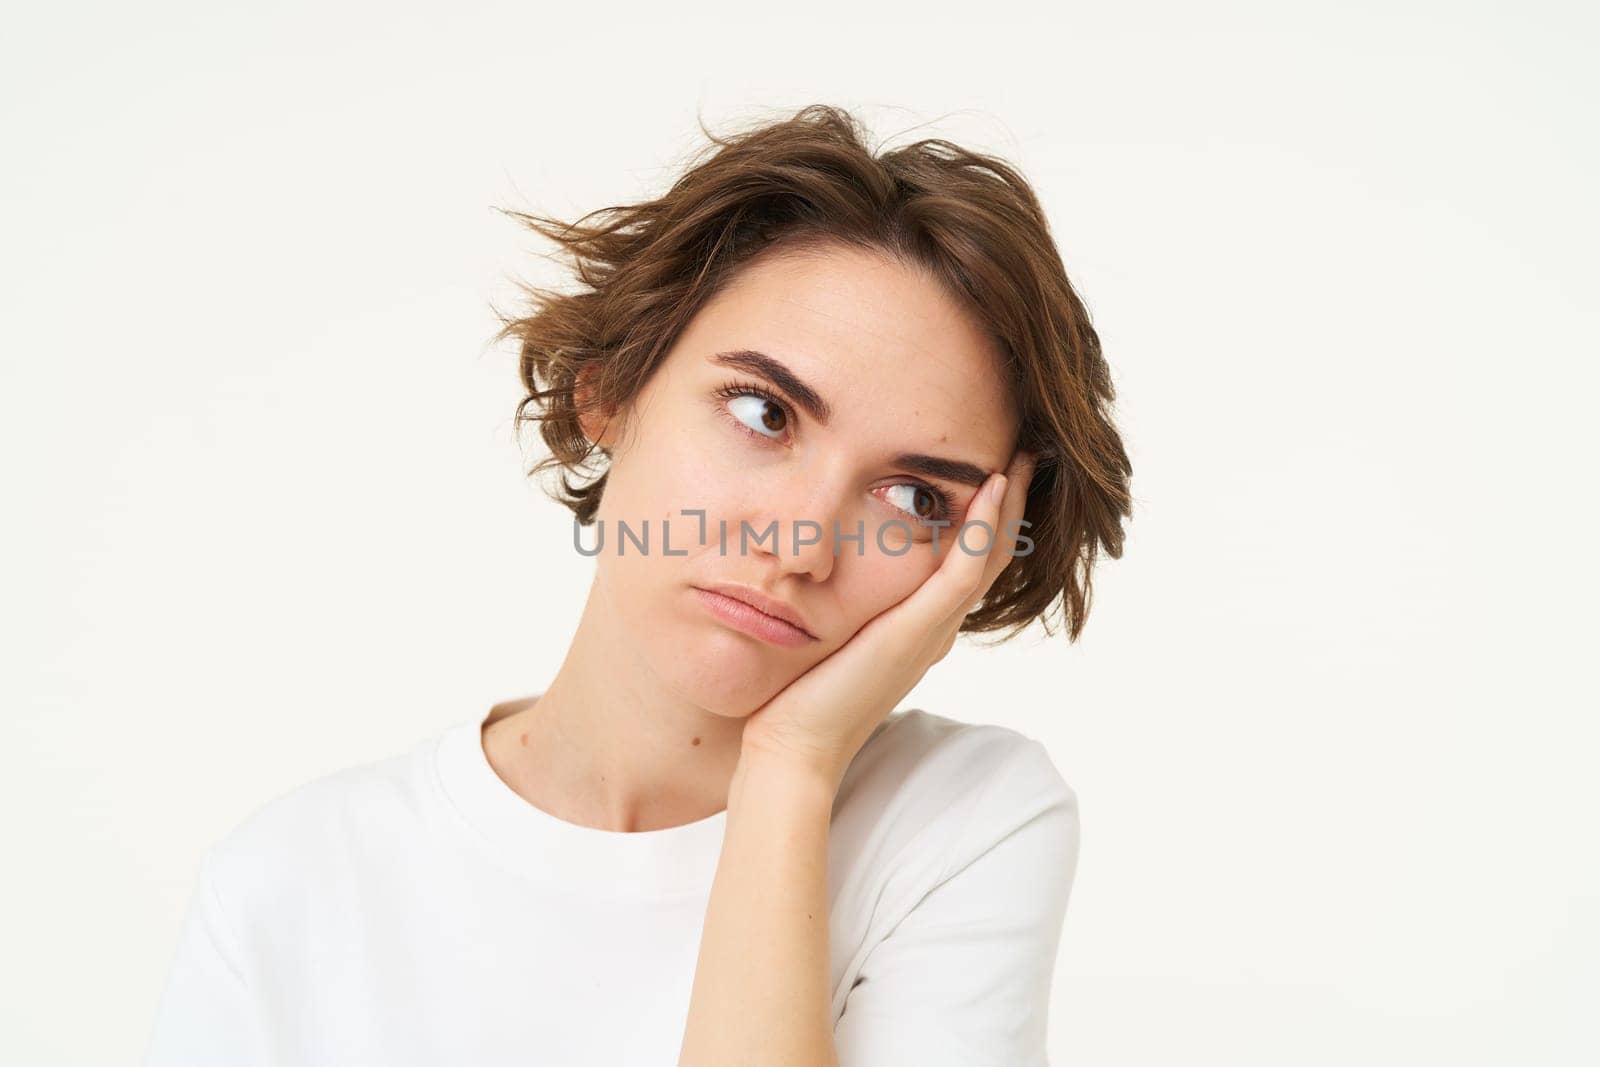 Portrait of young bored woman, leans head on hand and frowns, looks upset and grumpy, thinking, standing over white background.